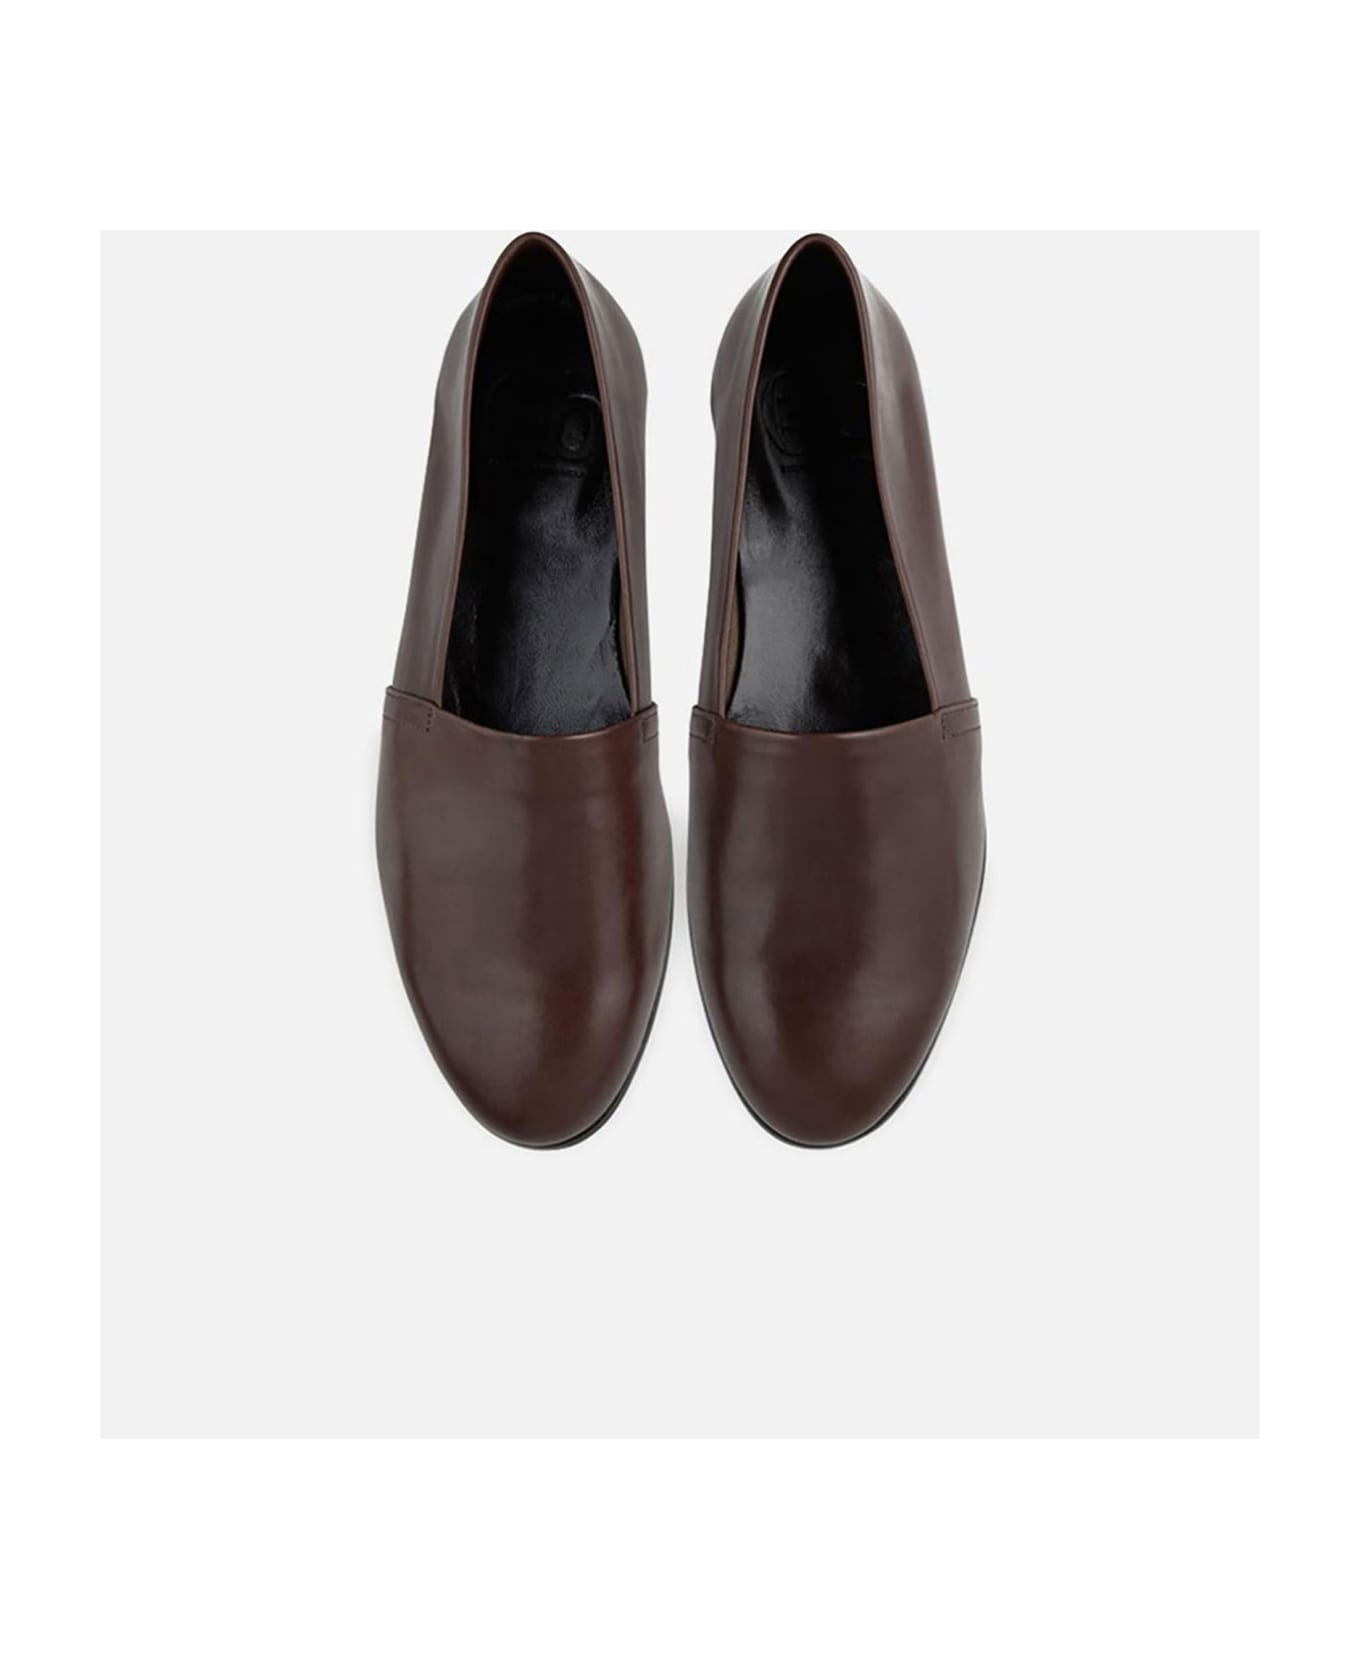 CB Made in Italy Dark Leather Slip-on Amalfi - Brown